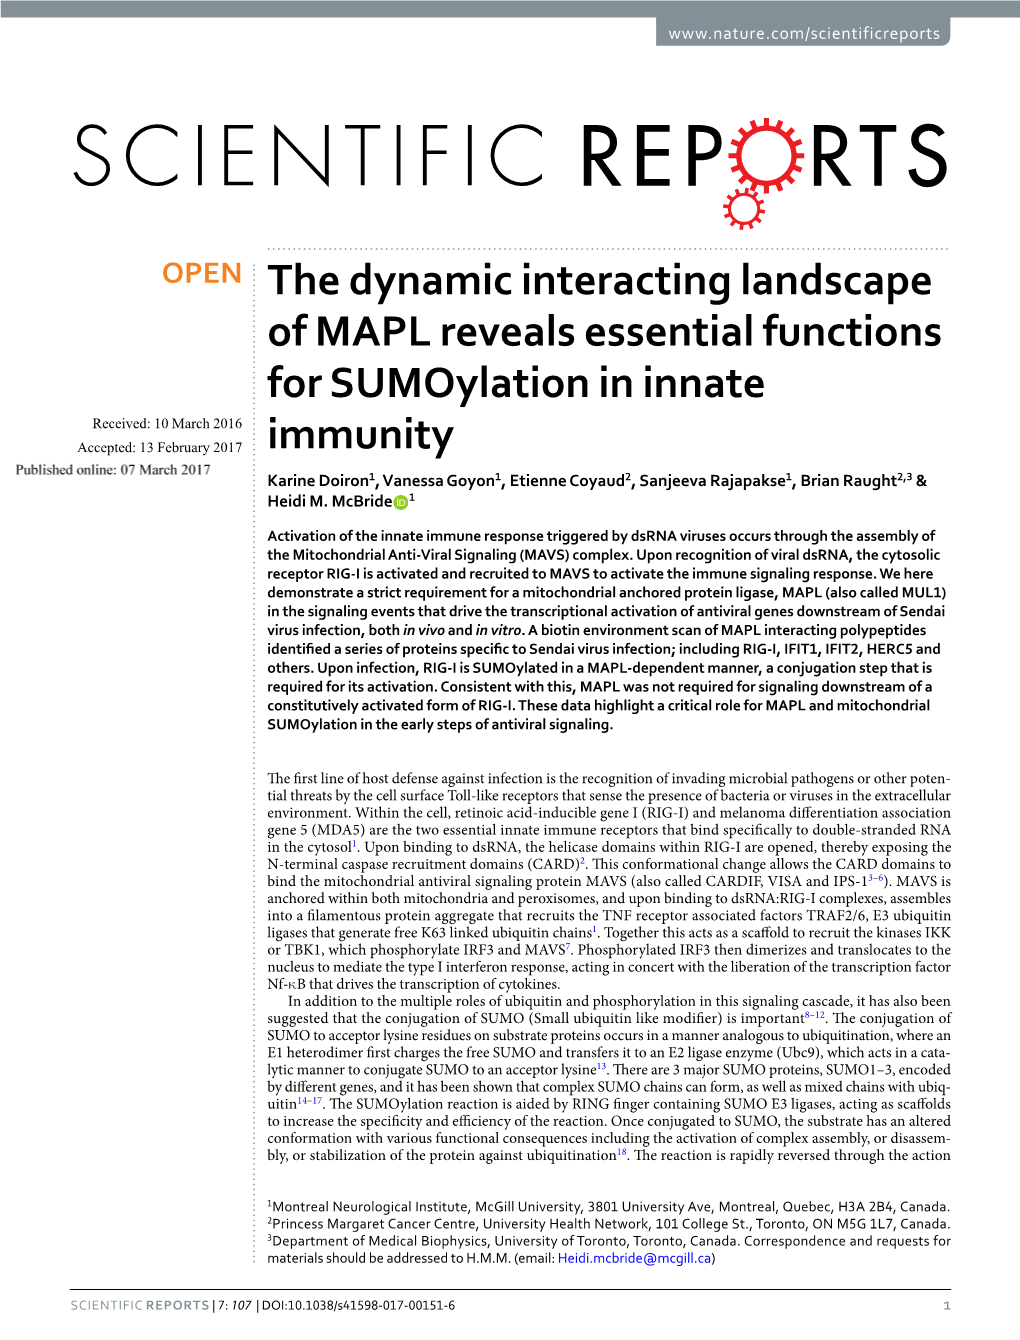 The Dynamic Interacting Landscape of MAPL Reveals Essential Functions